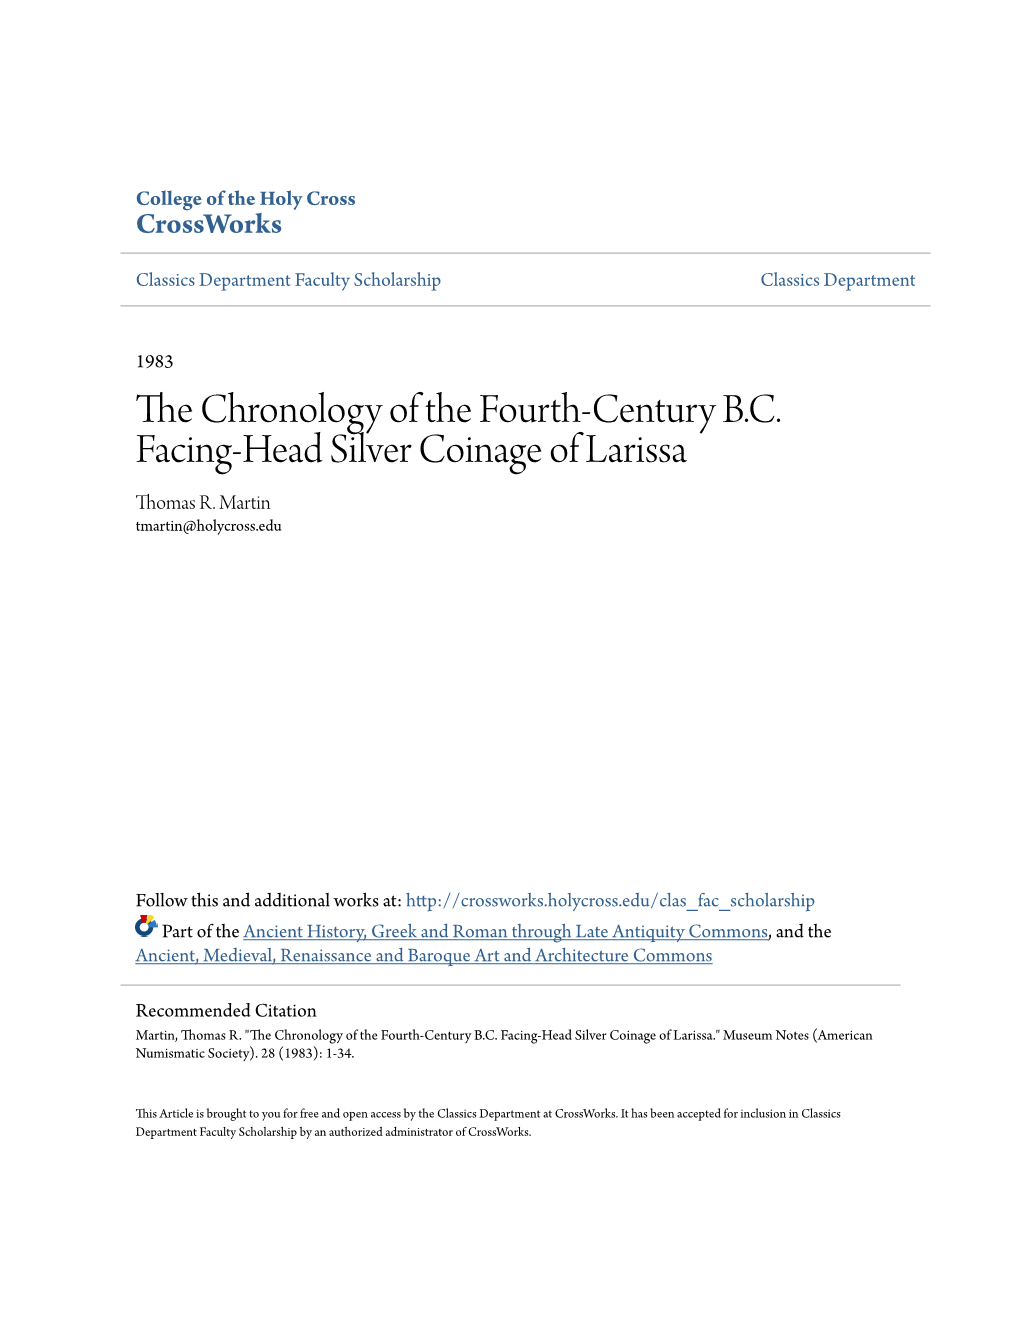 The Chronology of the Fourth-Century B.C. Facing-Head Silver Coinage of Larissa